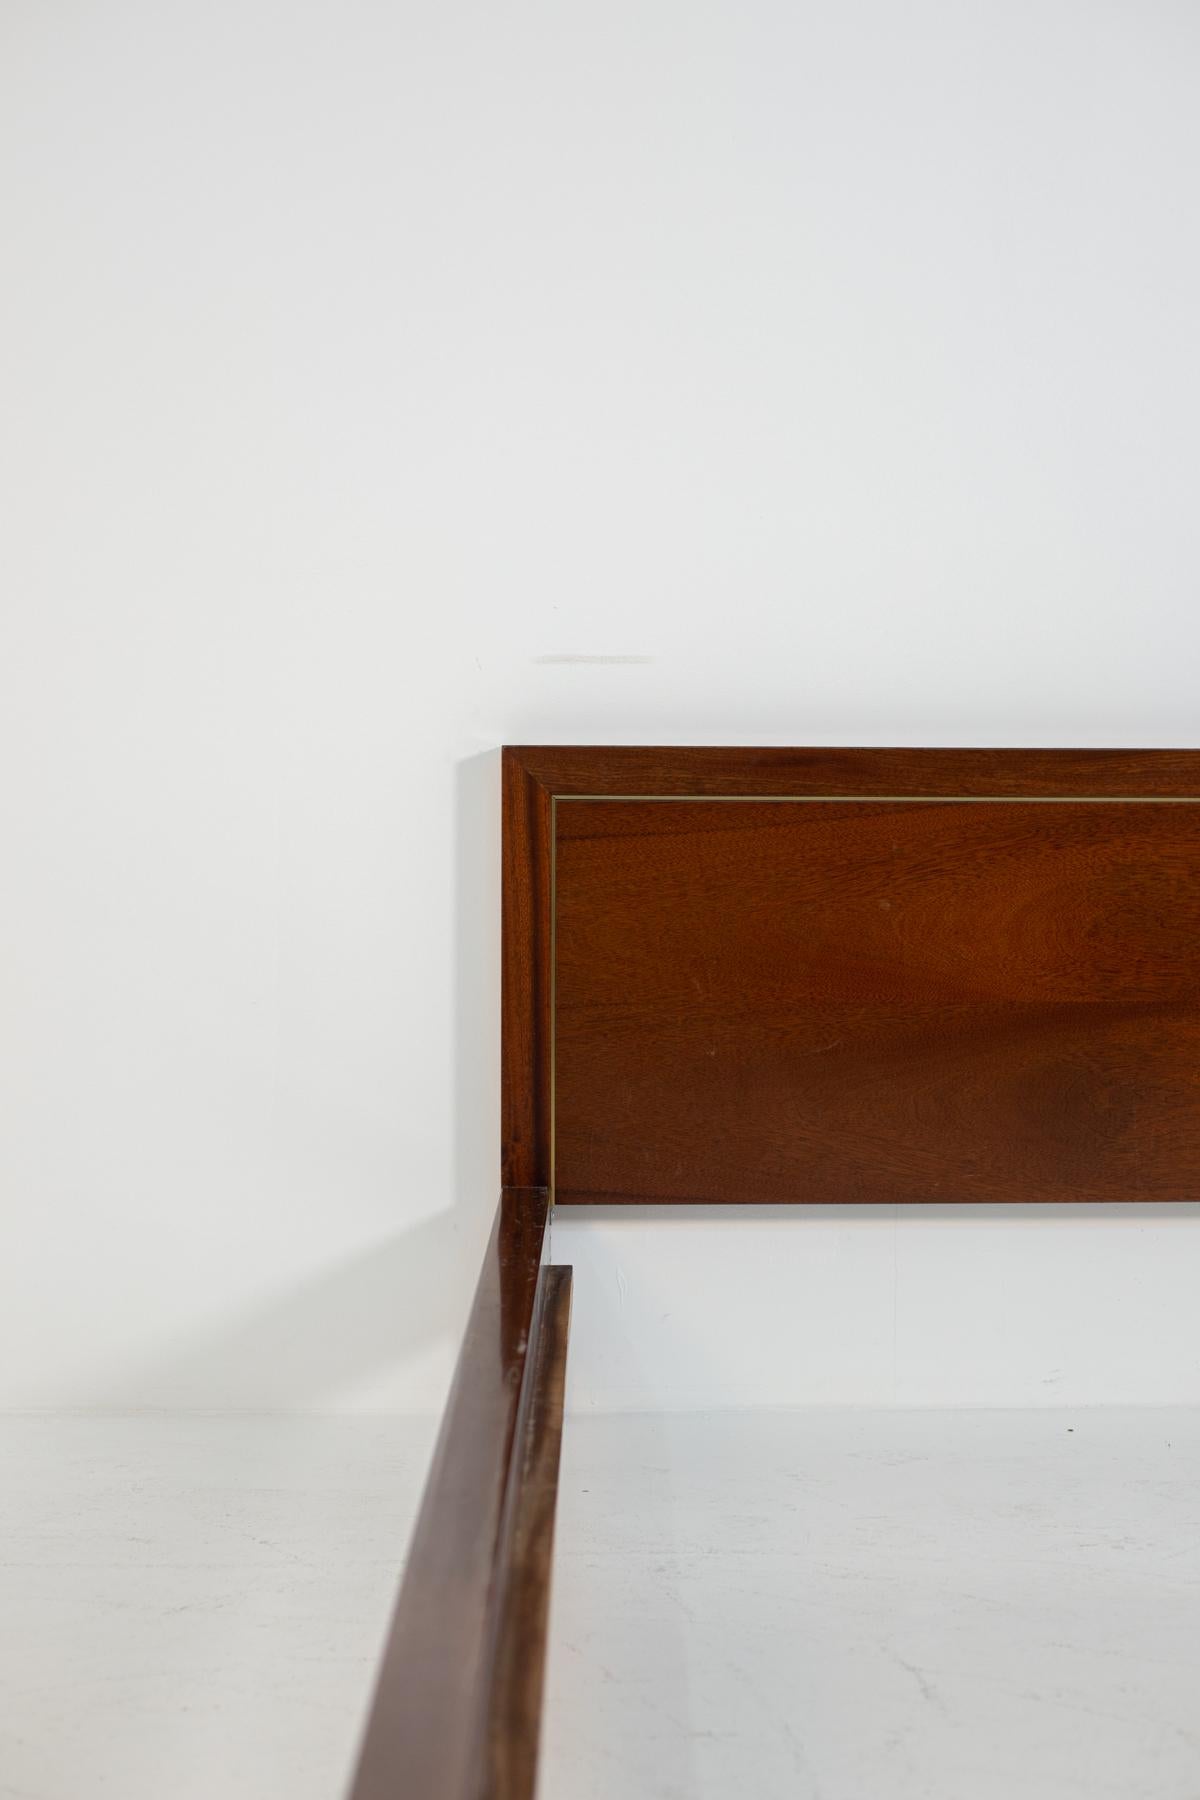 Modern Pierre Balmain Headboard in Wood and Brass, Signed, 1980s For Sale